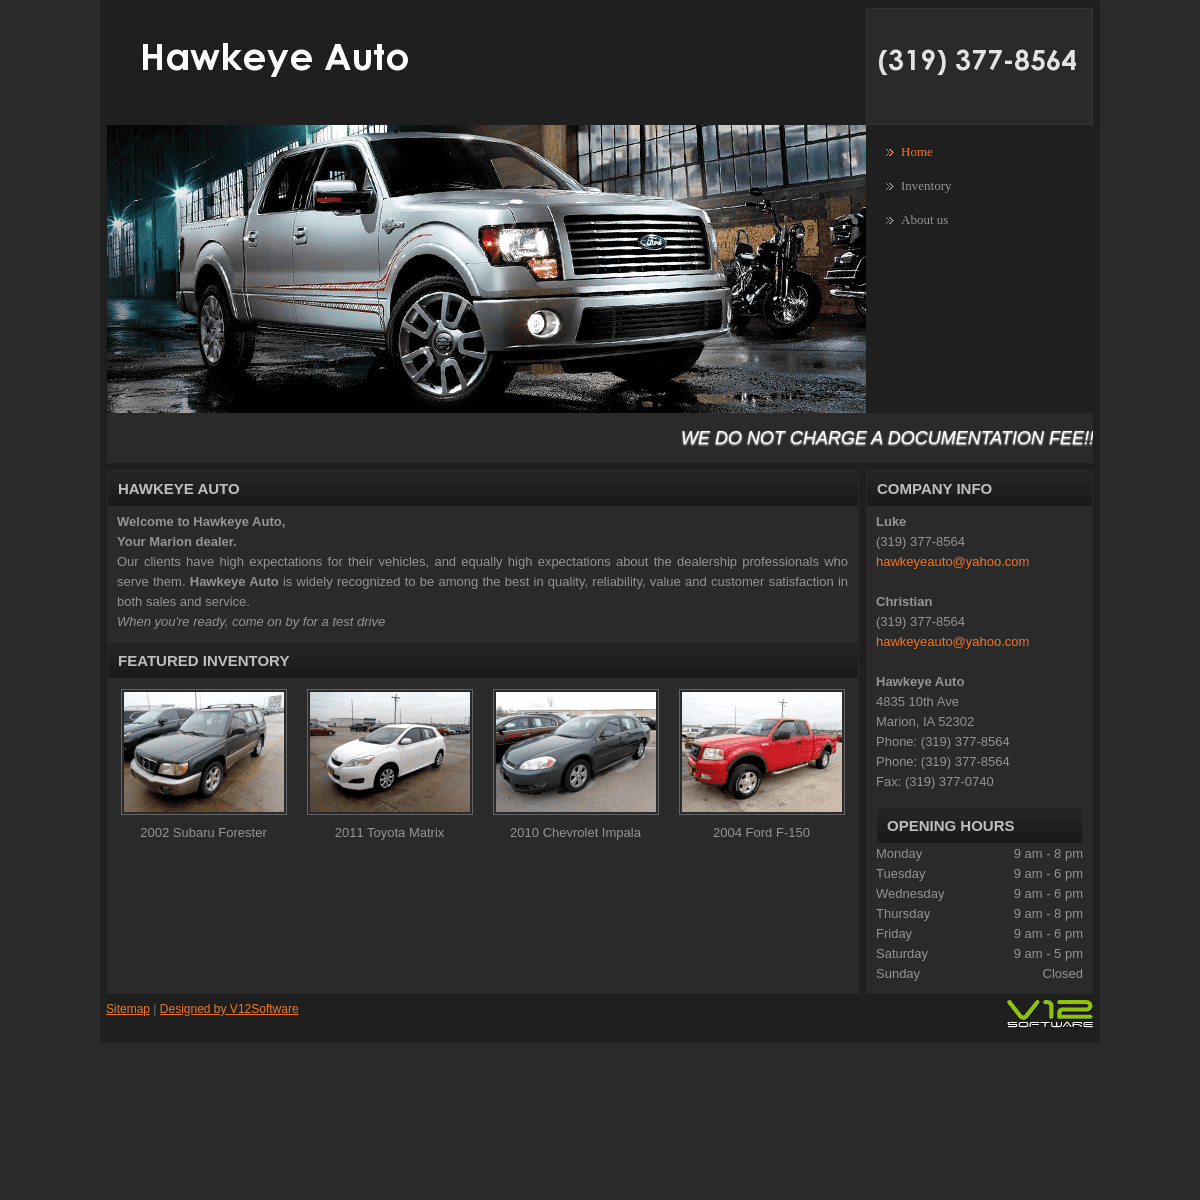 A complete backup of hawkeyeautoonline.com